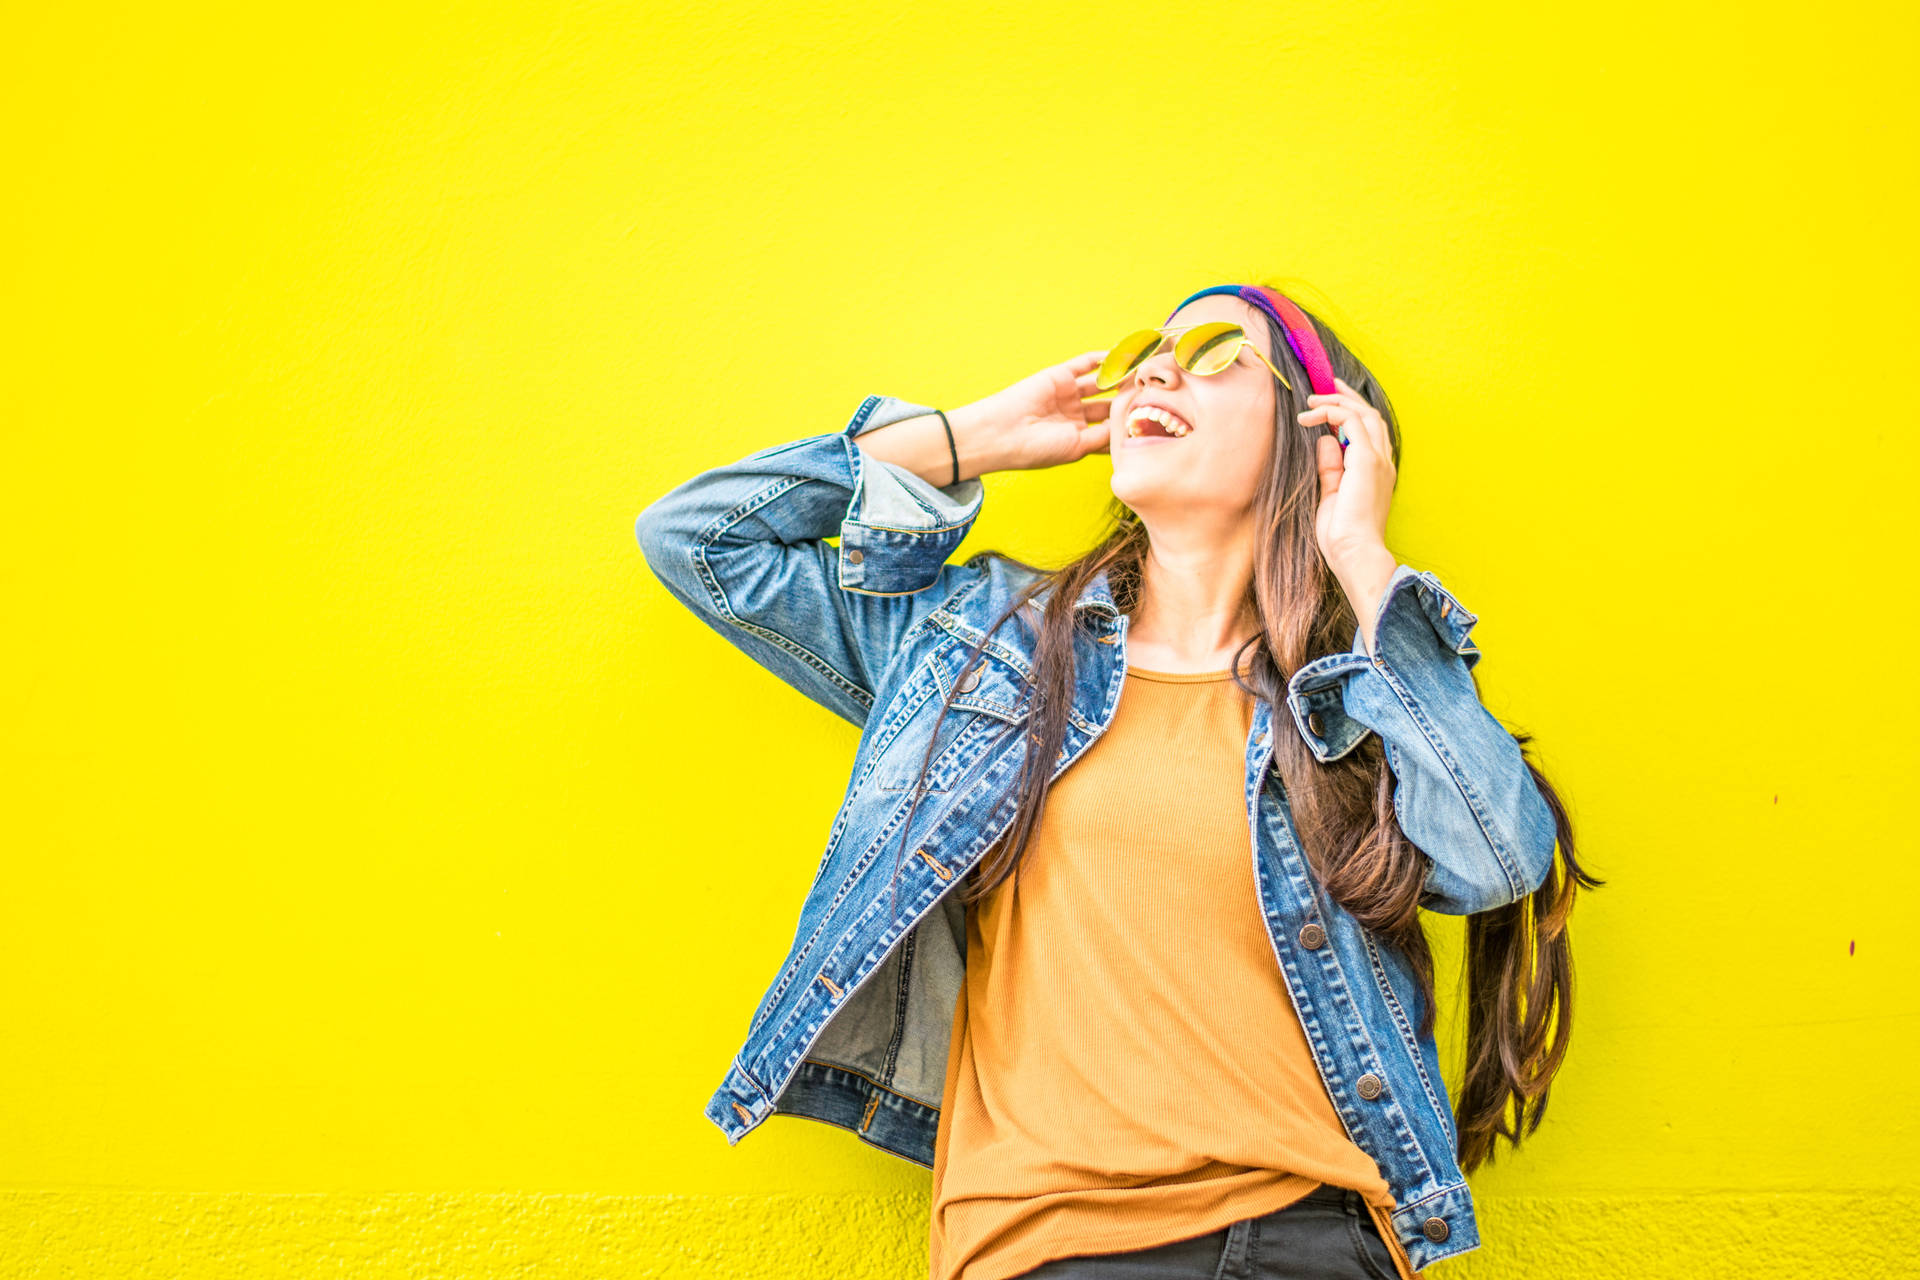 Model On Yellow Background Wallpaper